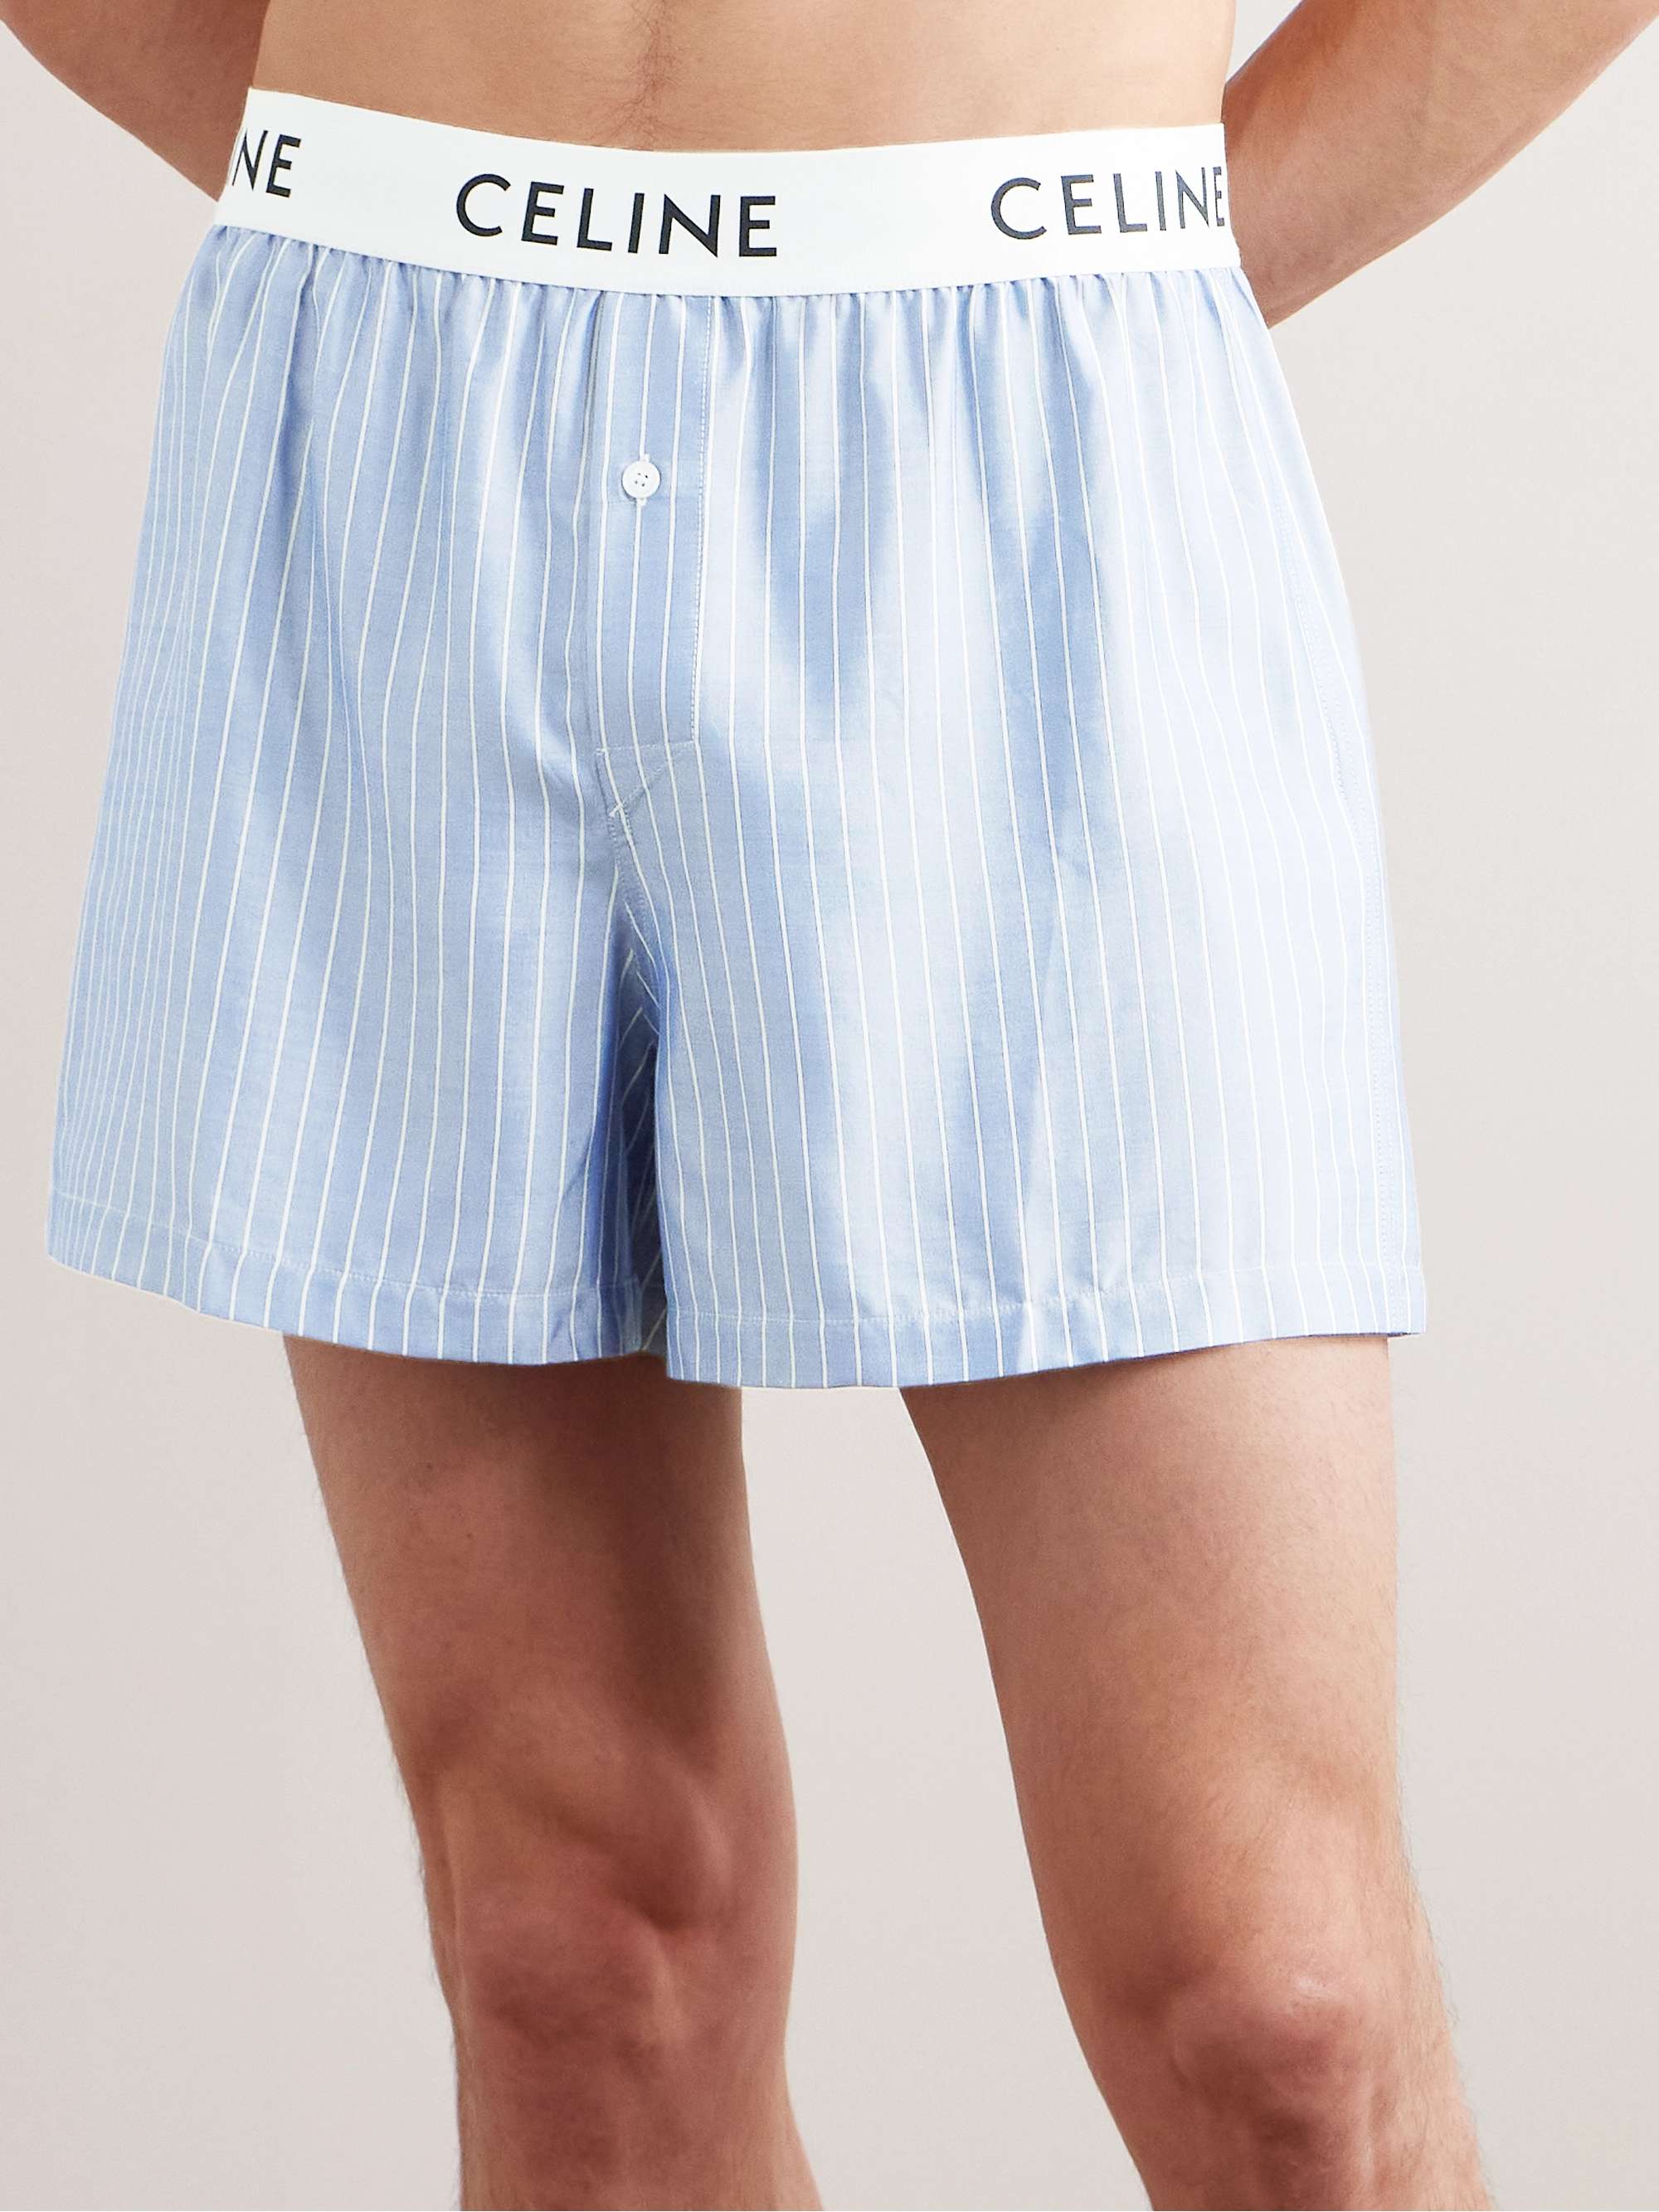 CELINE BOXERS IN COTTON JERSEY - WHITE